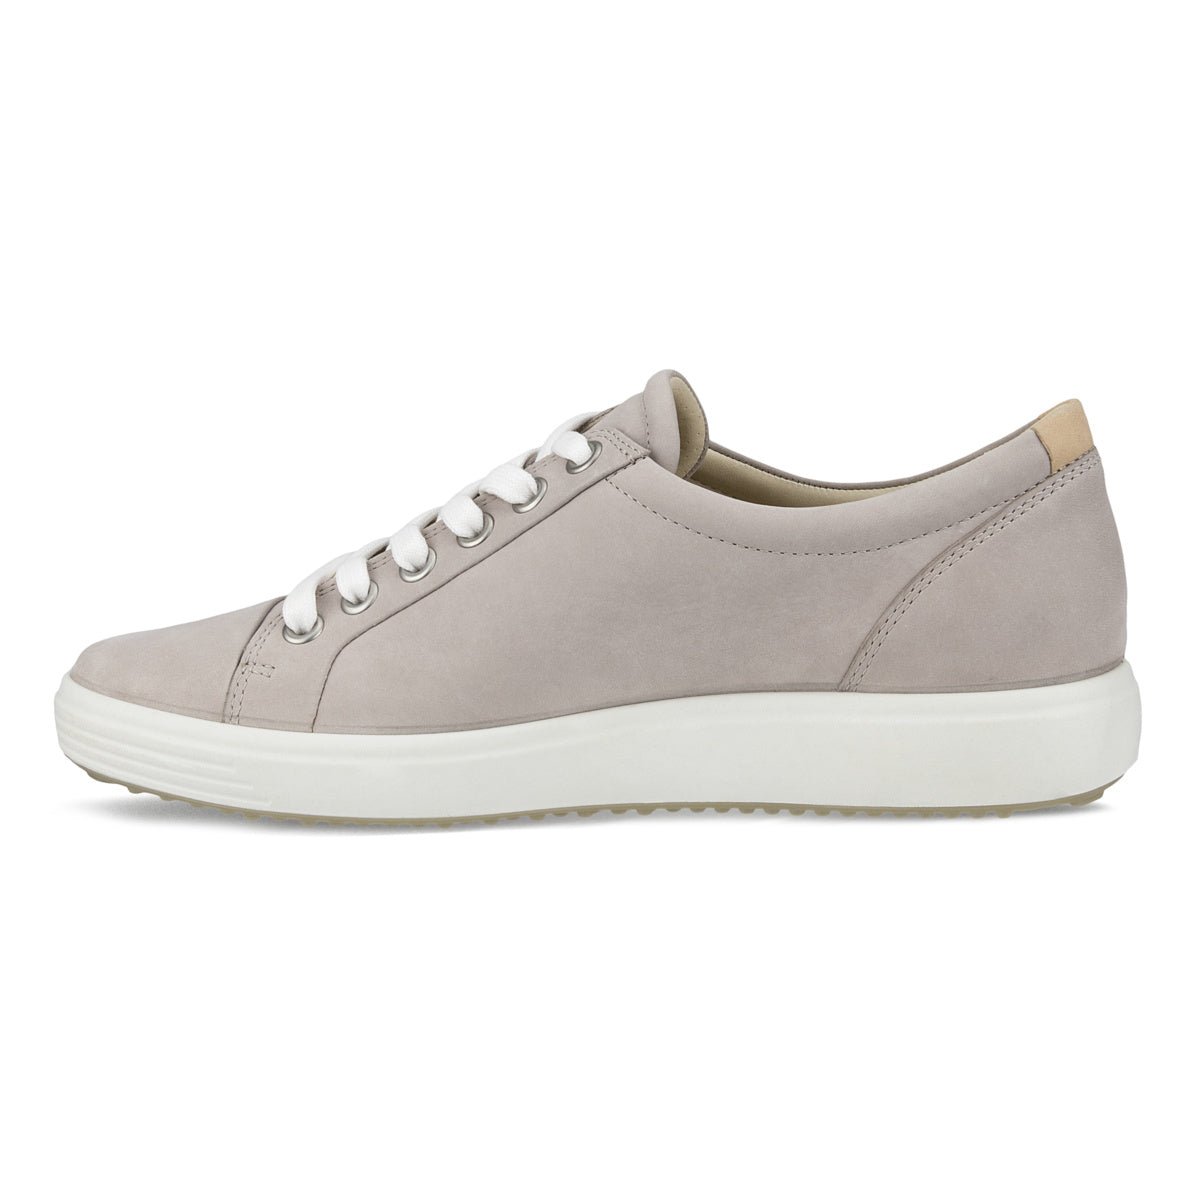 Ecco Soft 7 430003 02386 Ladies Grey Rose Nubuck Arch Support Lace Up Shoes